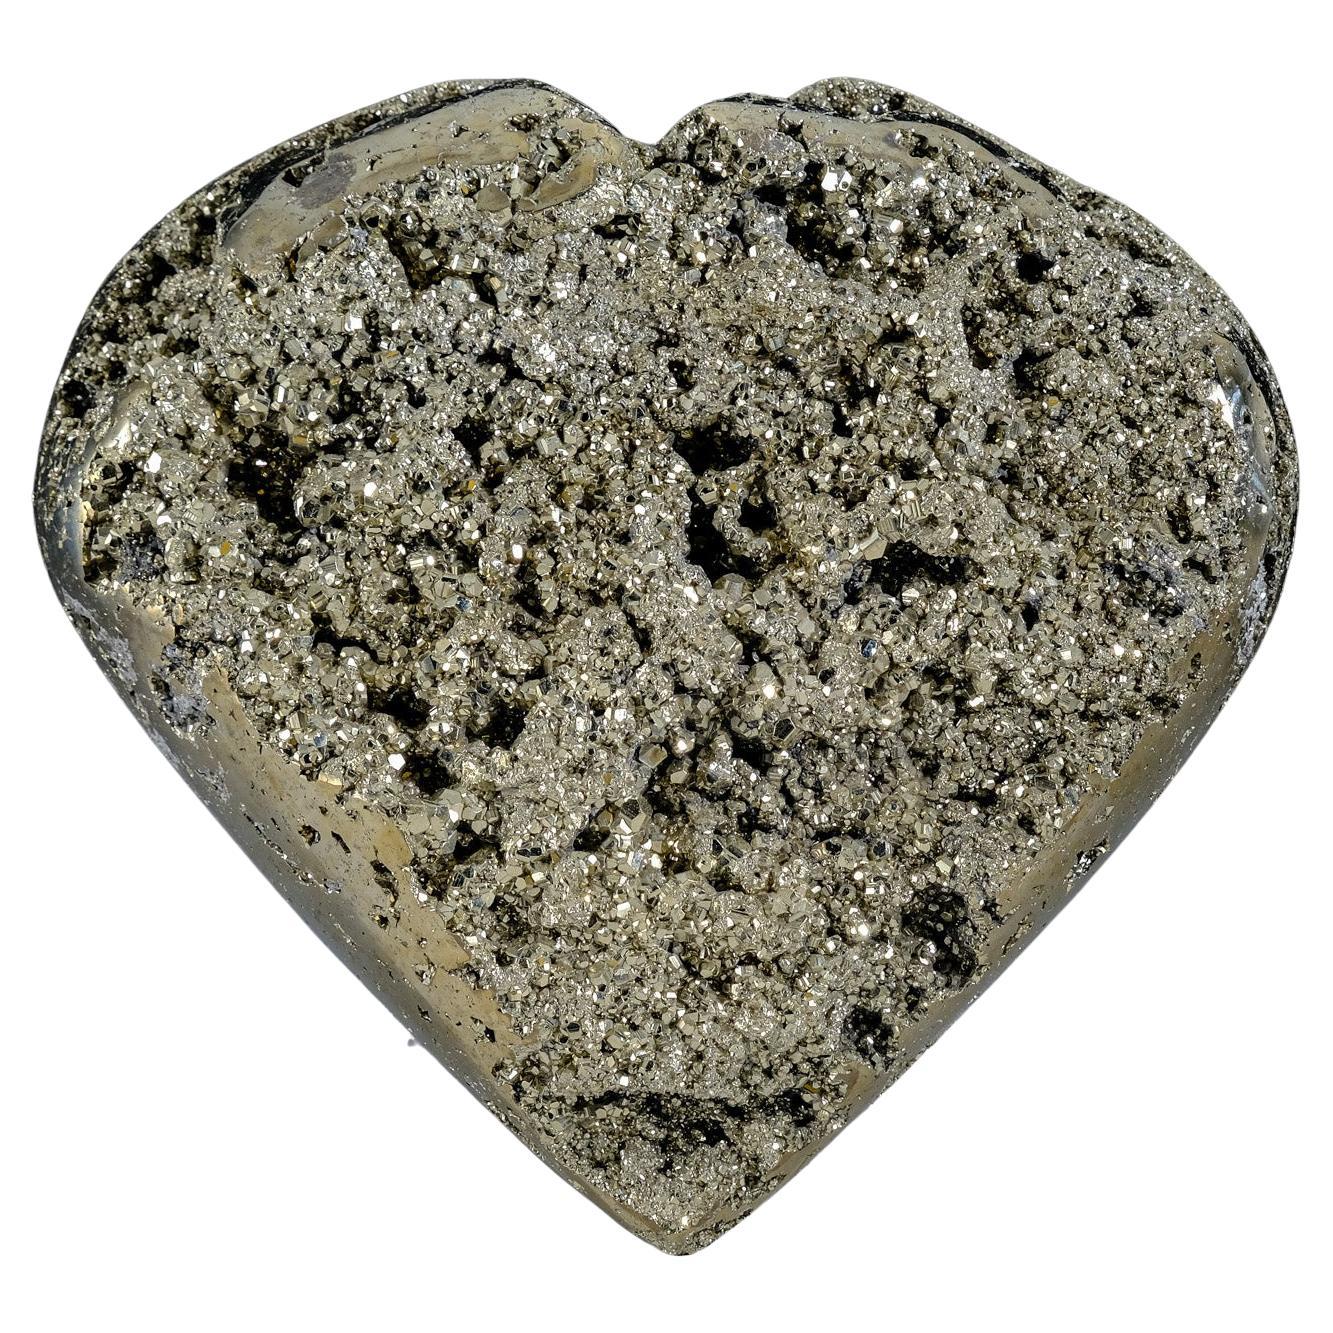  Natural Pyrite Cluster Heart (7 lbs)